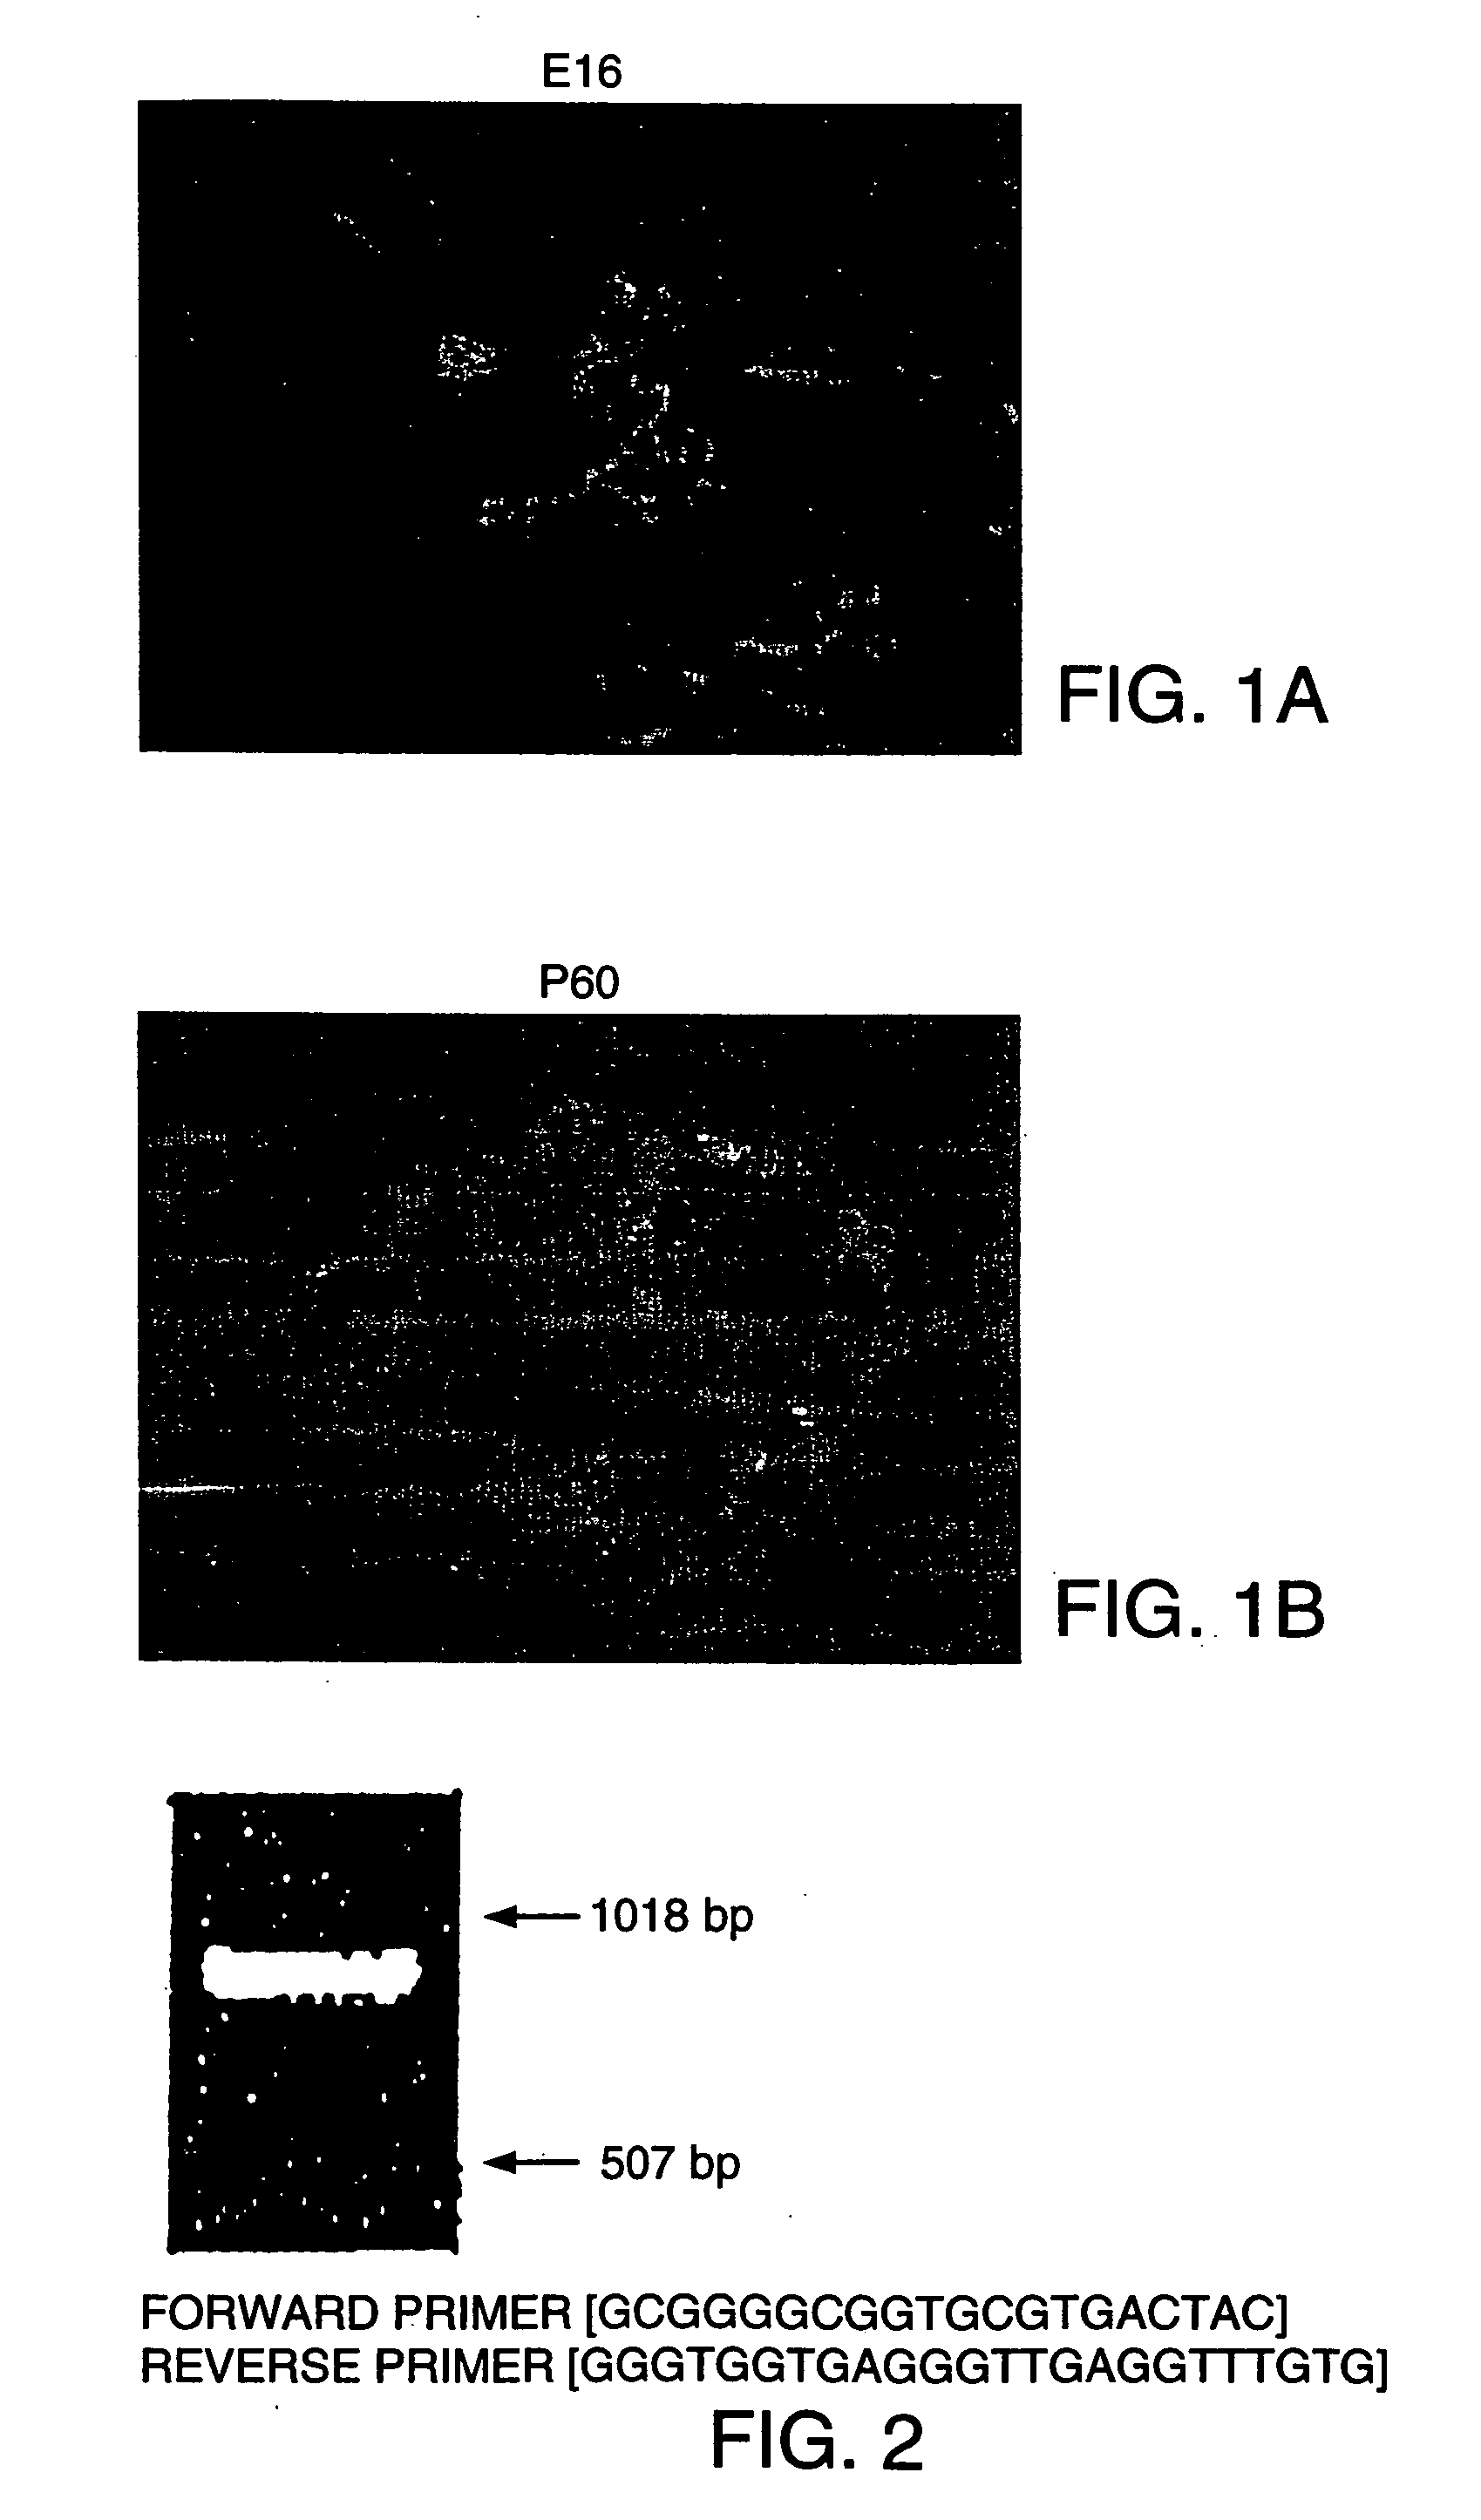 Method of transplanting in a mammal and treating diabetes mellitus by administering a pseudo-islet like aggregate differentiated from a nestin-positive pancreatic stem cell